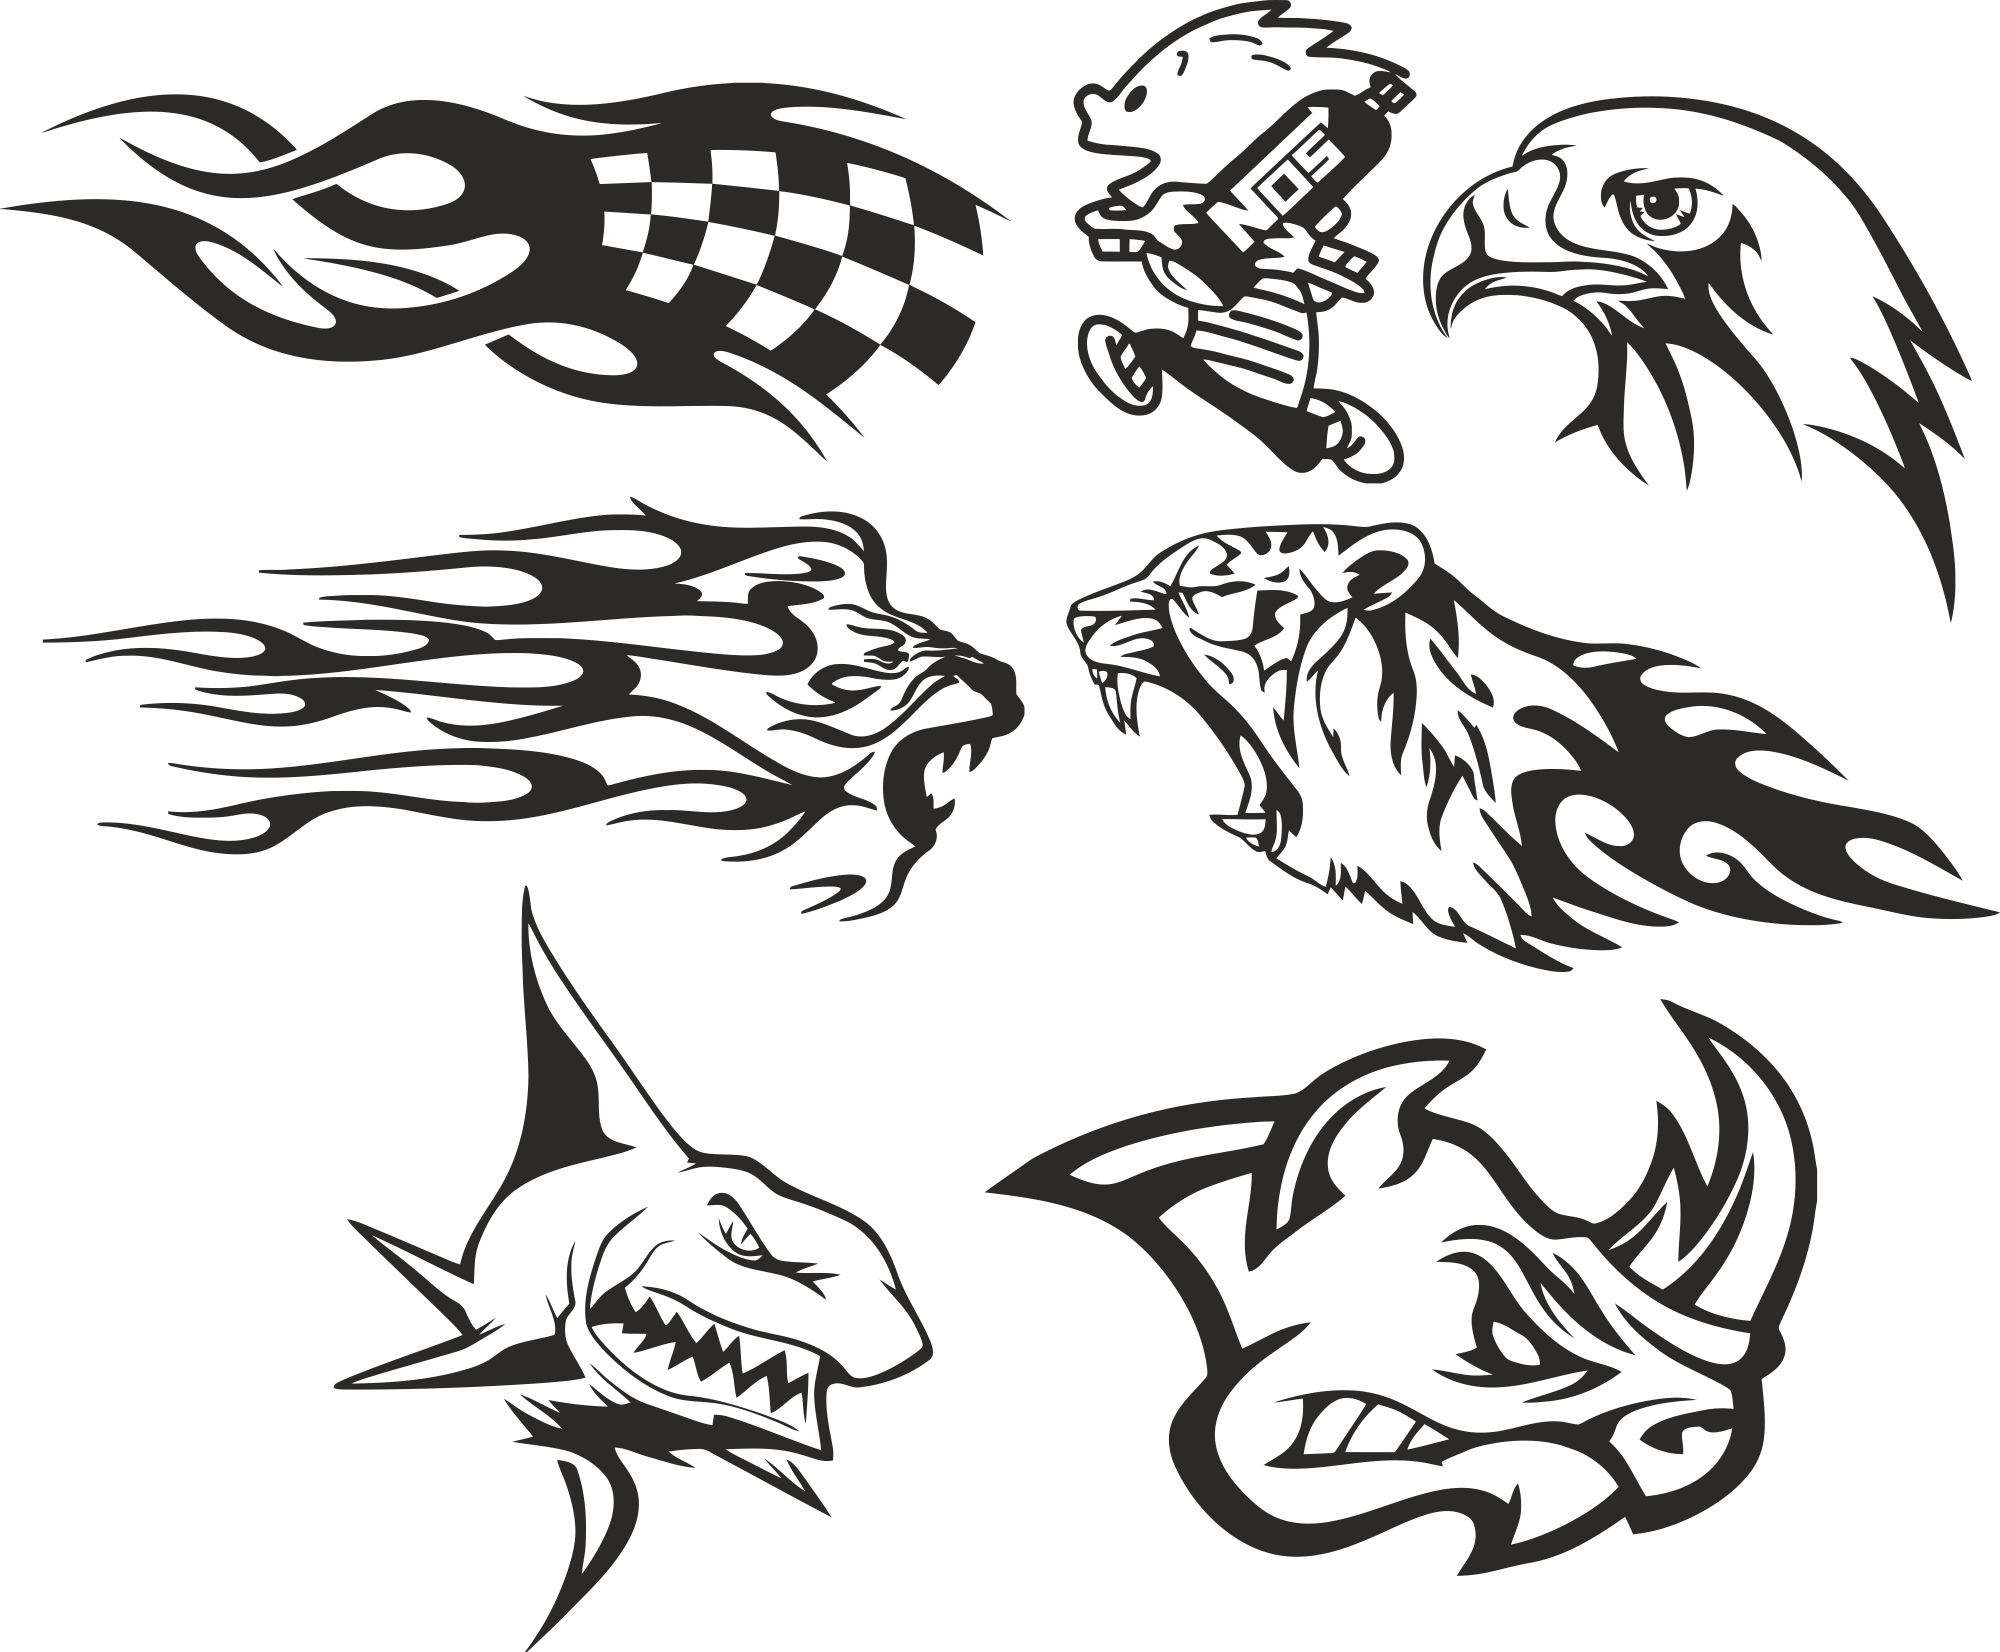 car-decals-set-free-vector-cdr-download-3axis-co